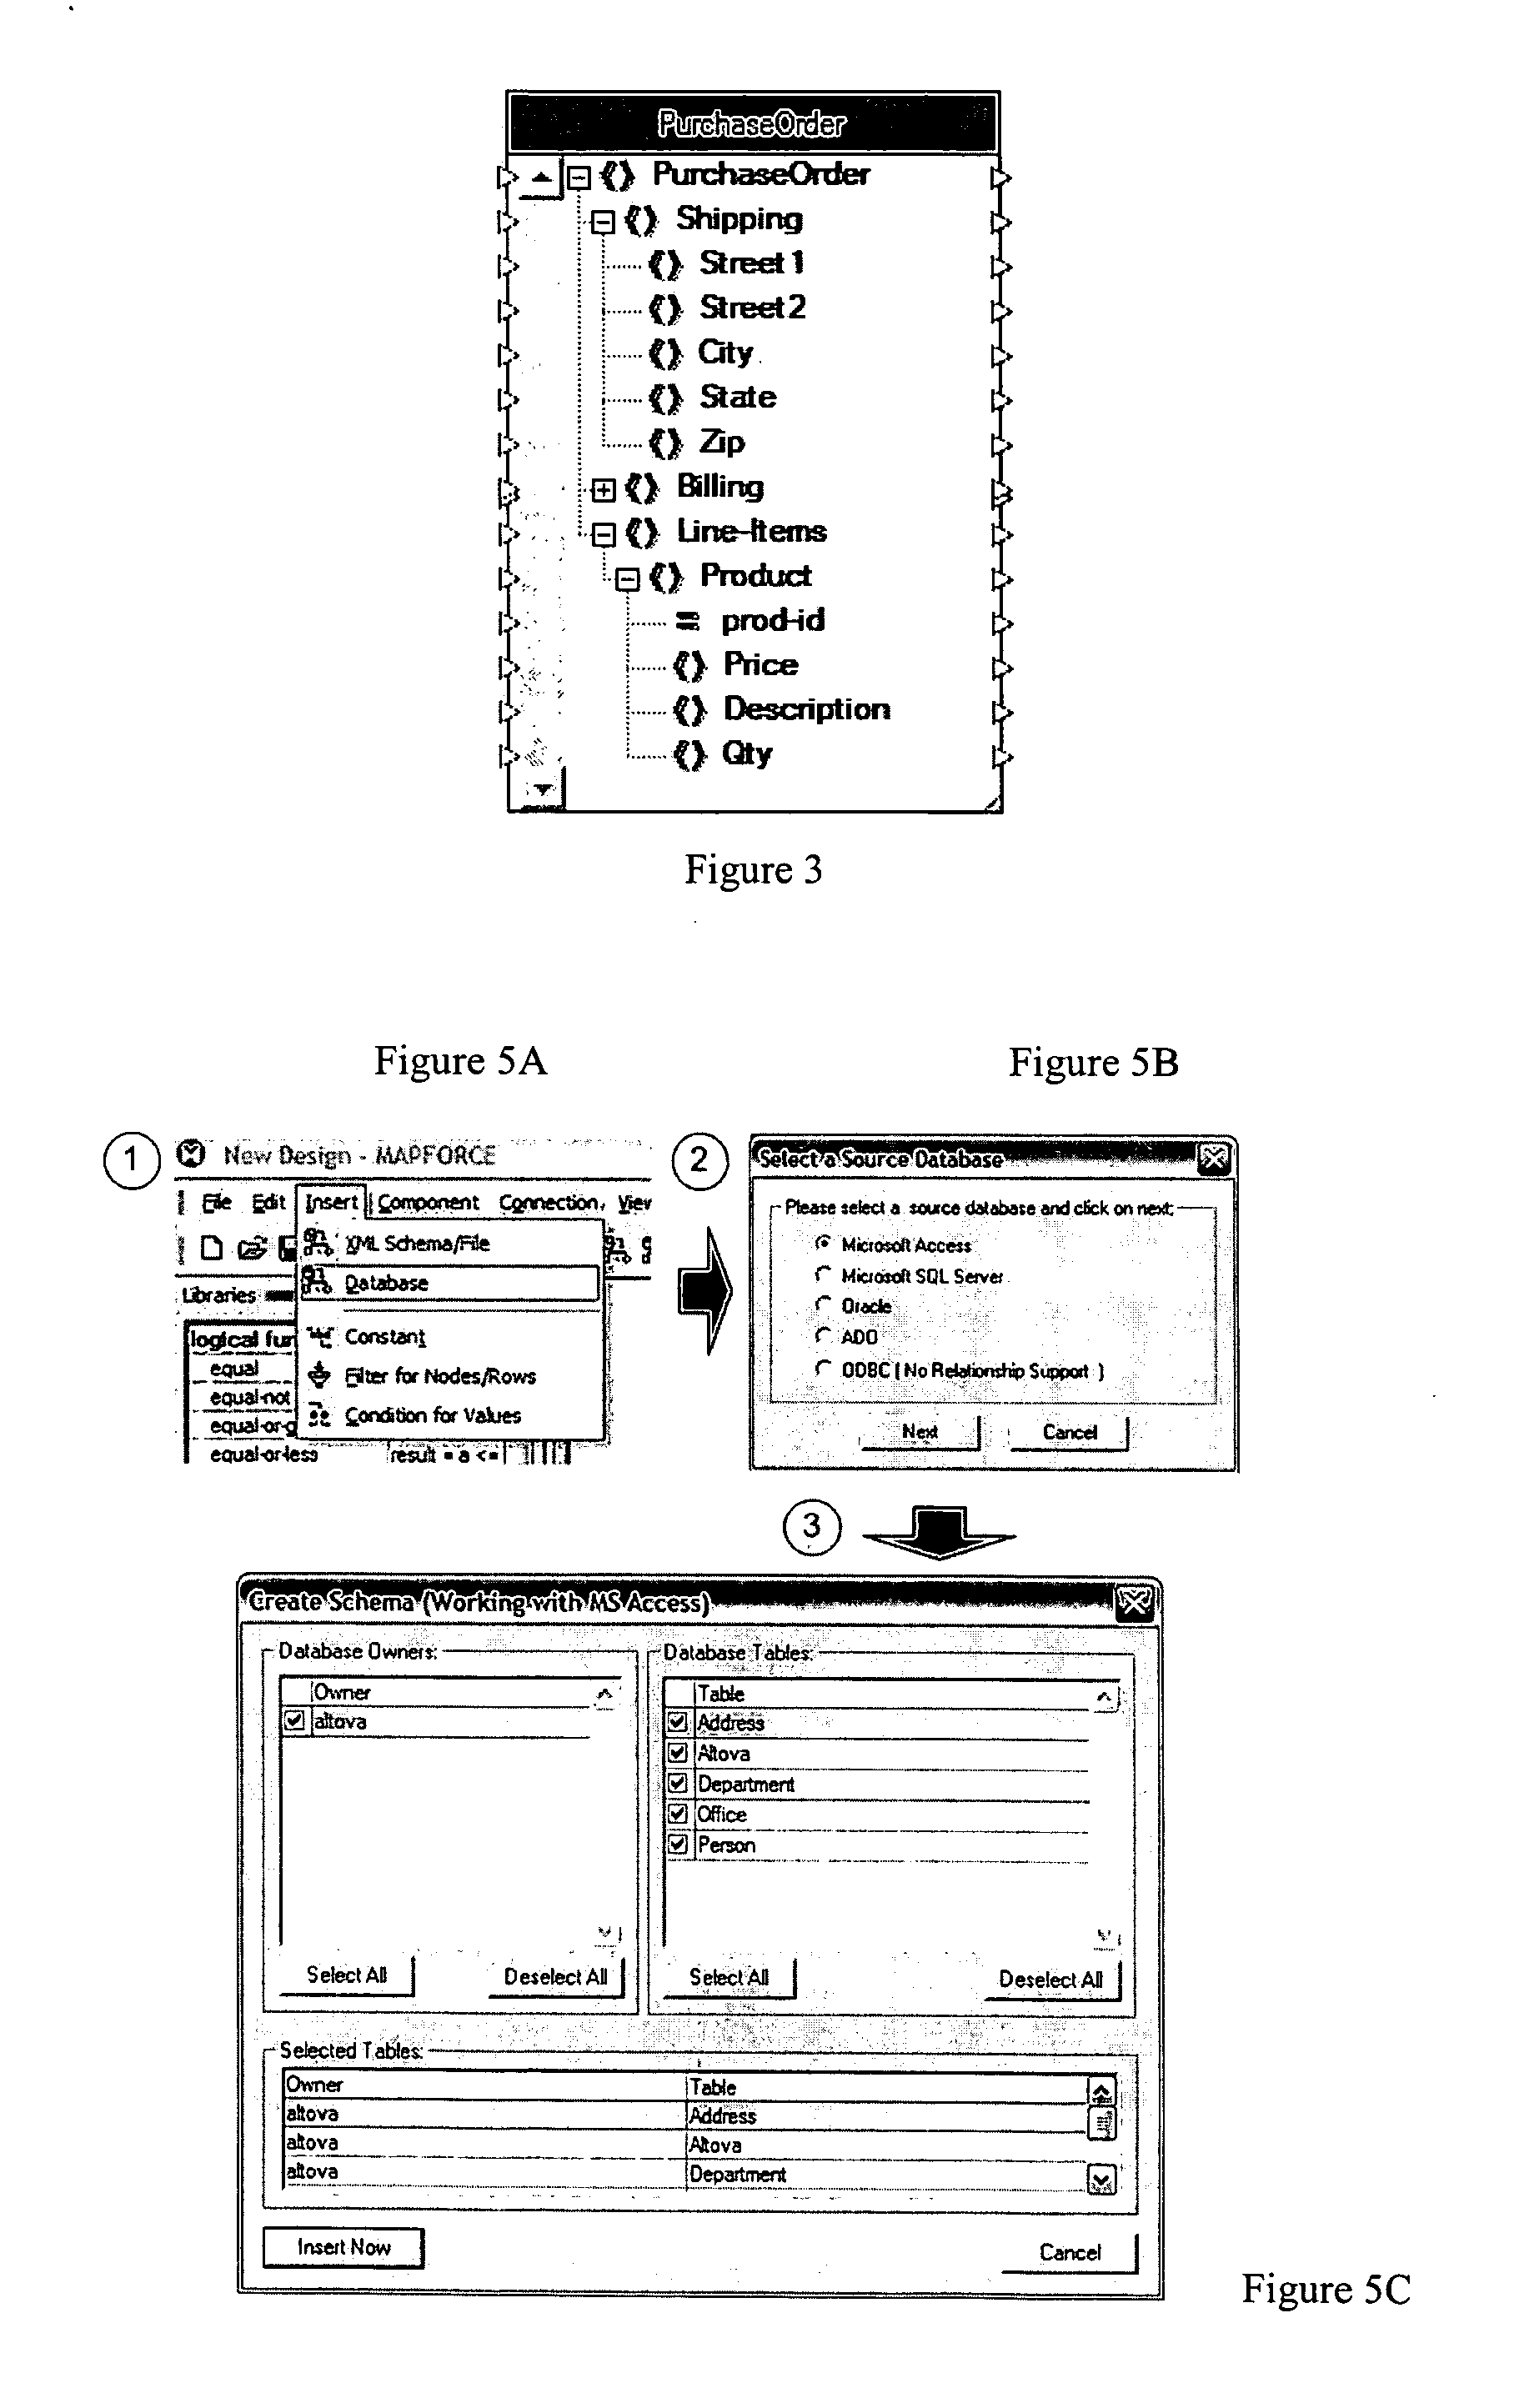 Method and system for visual data mapping and code generation to support data integration